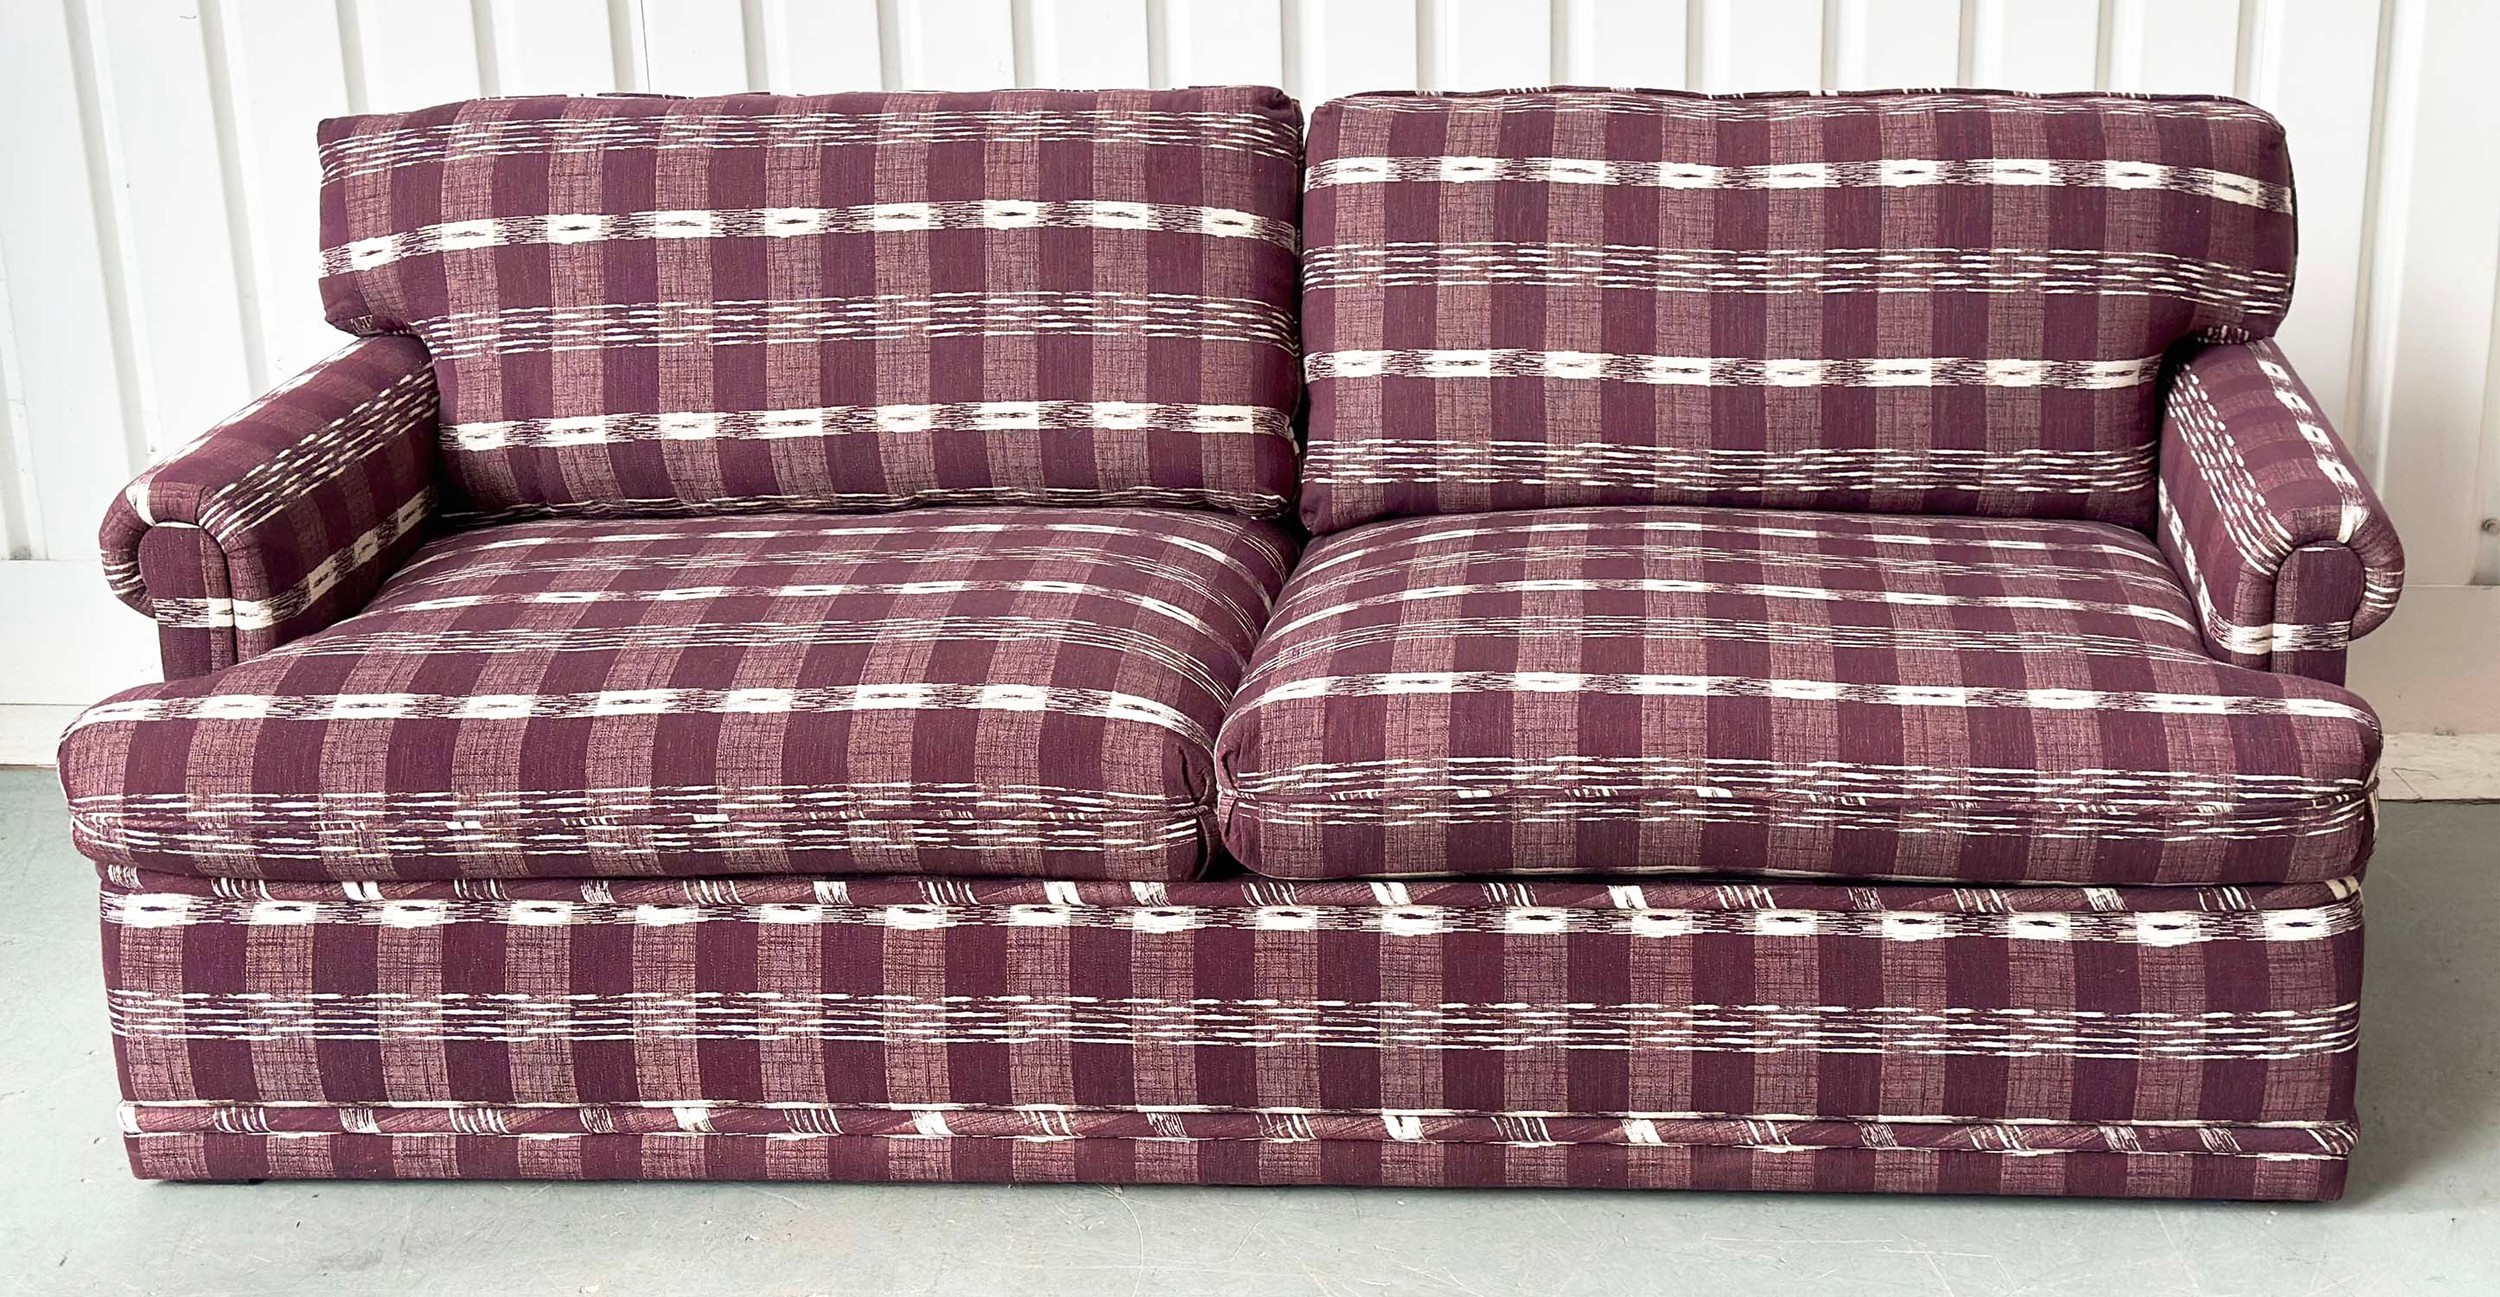 SOFA, Swedish check purple/white upholstery with scroll arms, 203cm W. - Image 2 of 9